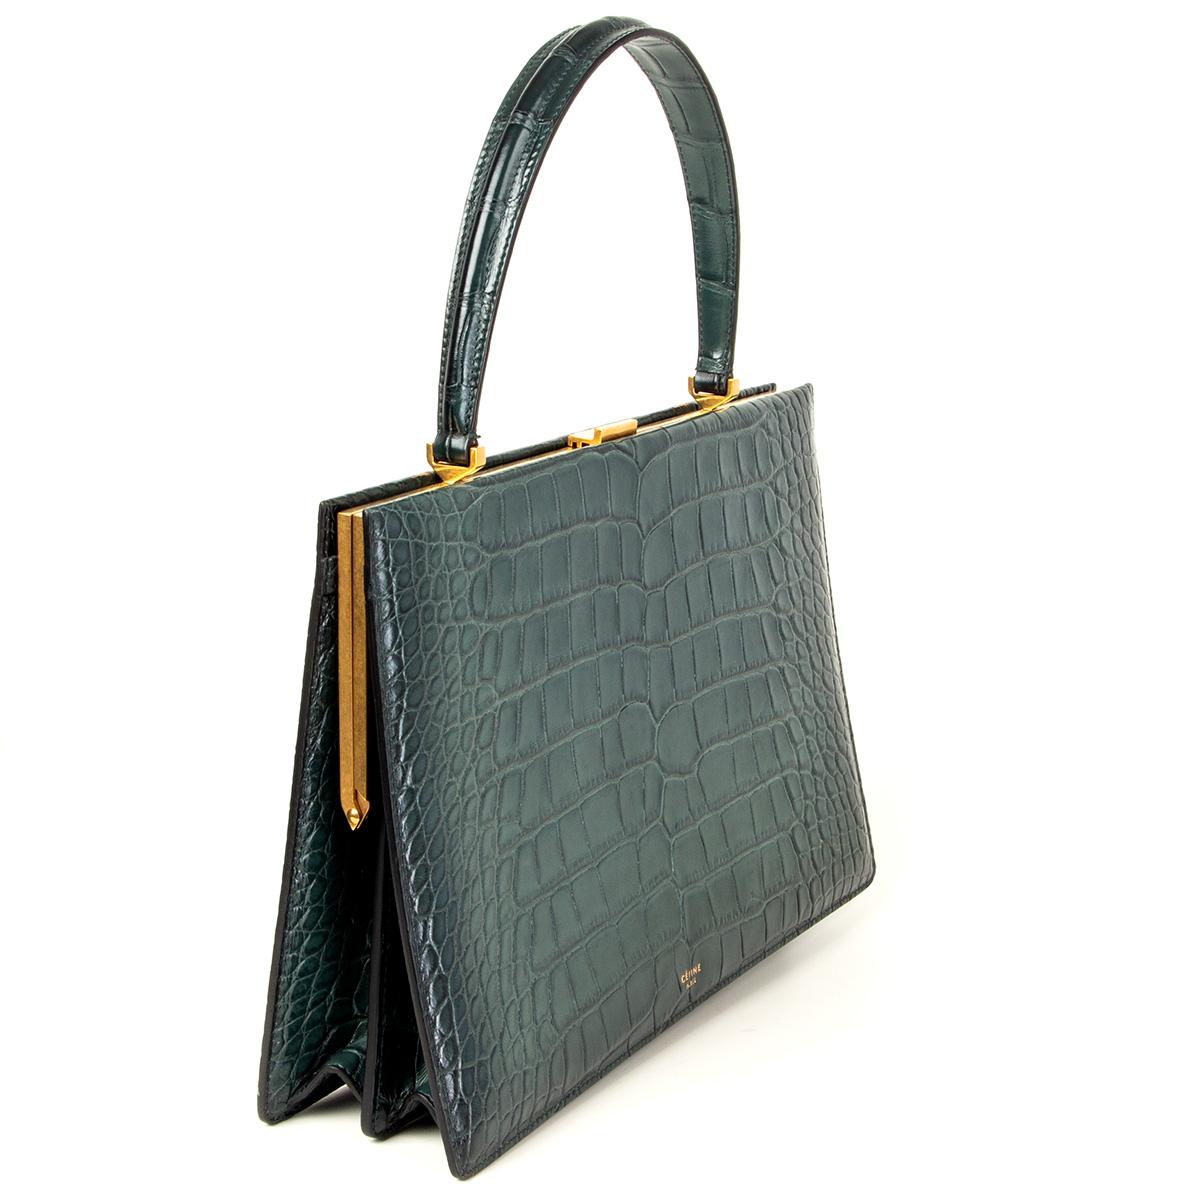 100% authentic Céline Medium Clasp Bag IN Cypress green crocodile and gold-tone hardware. Lined in cypress green lambskin and divided in three compartements with a zipper pocket in the middle. Has been carried once or twice and in excellent